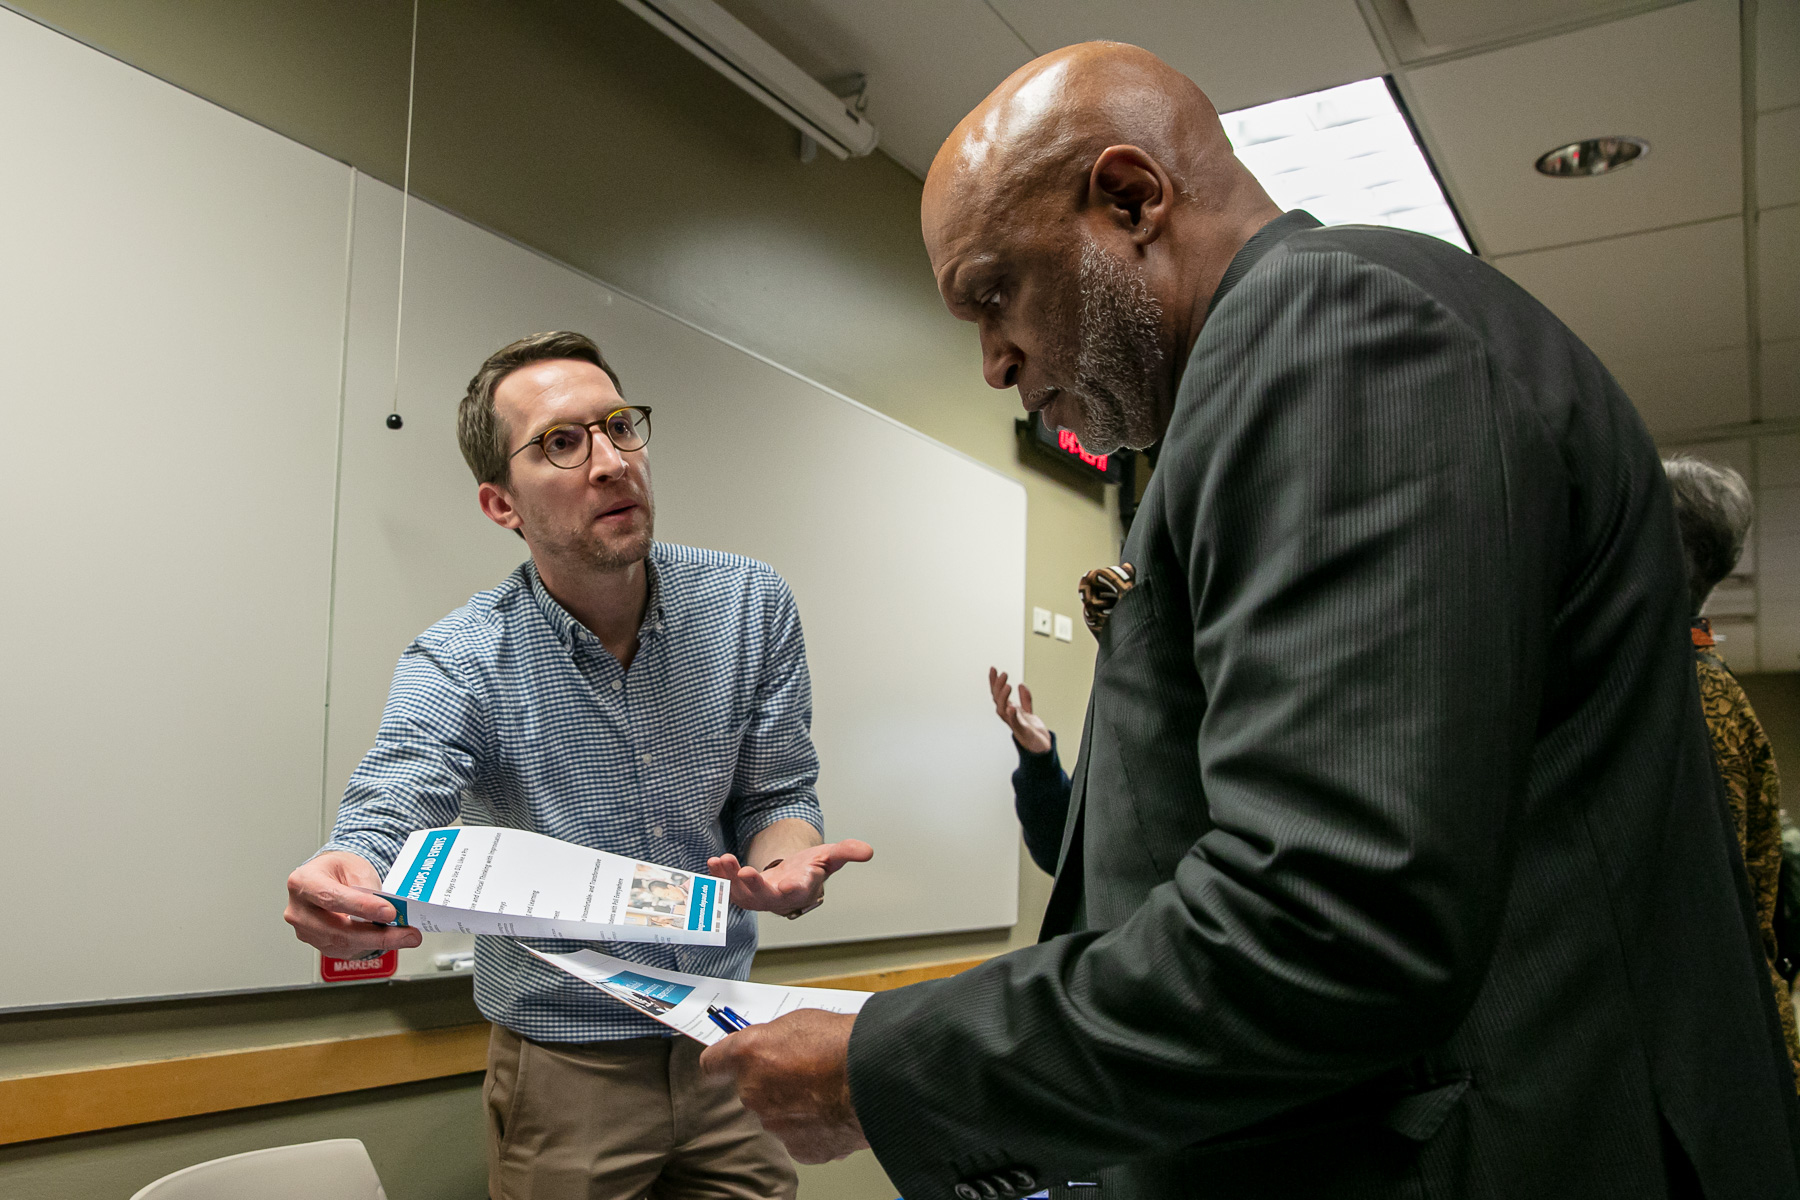 Daniel Stanford, director of faculty development in the Center for Teaching and Learning, presents information regarding teaching development seminars to adjunct faculty. (DePaul University/Randall Spriggs)